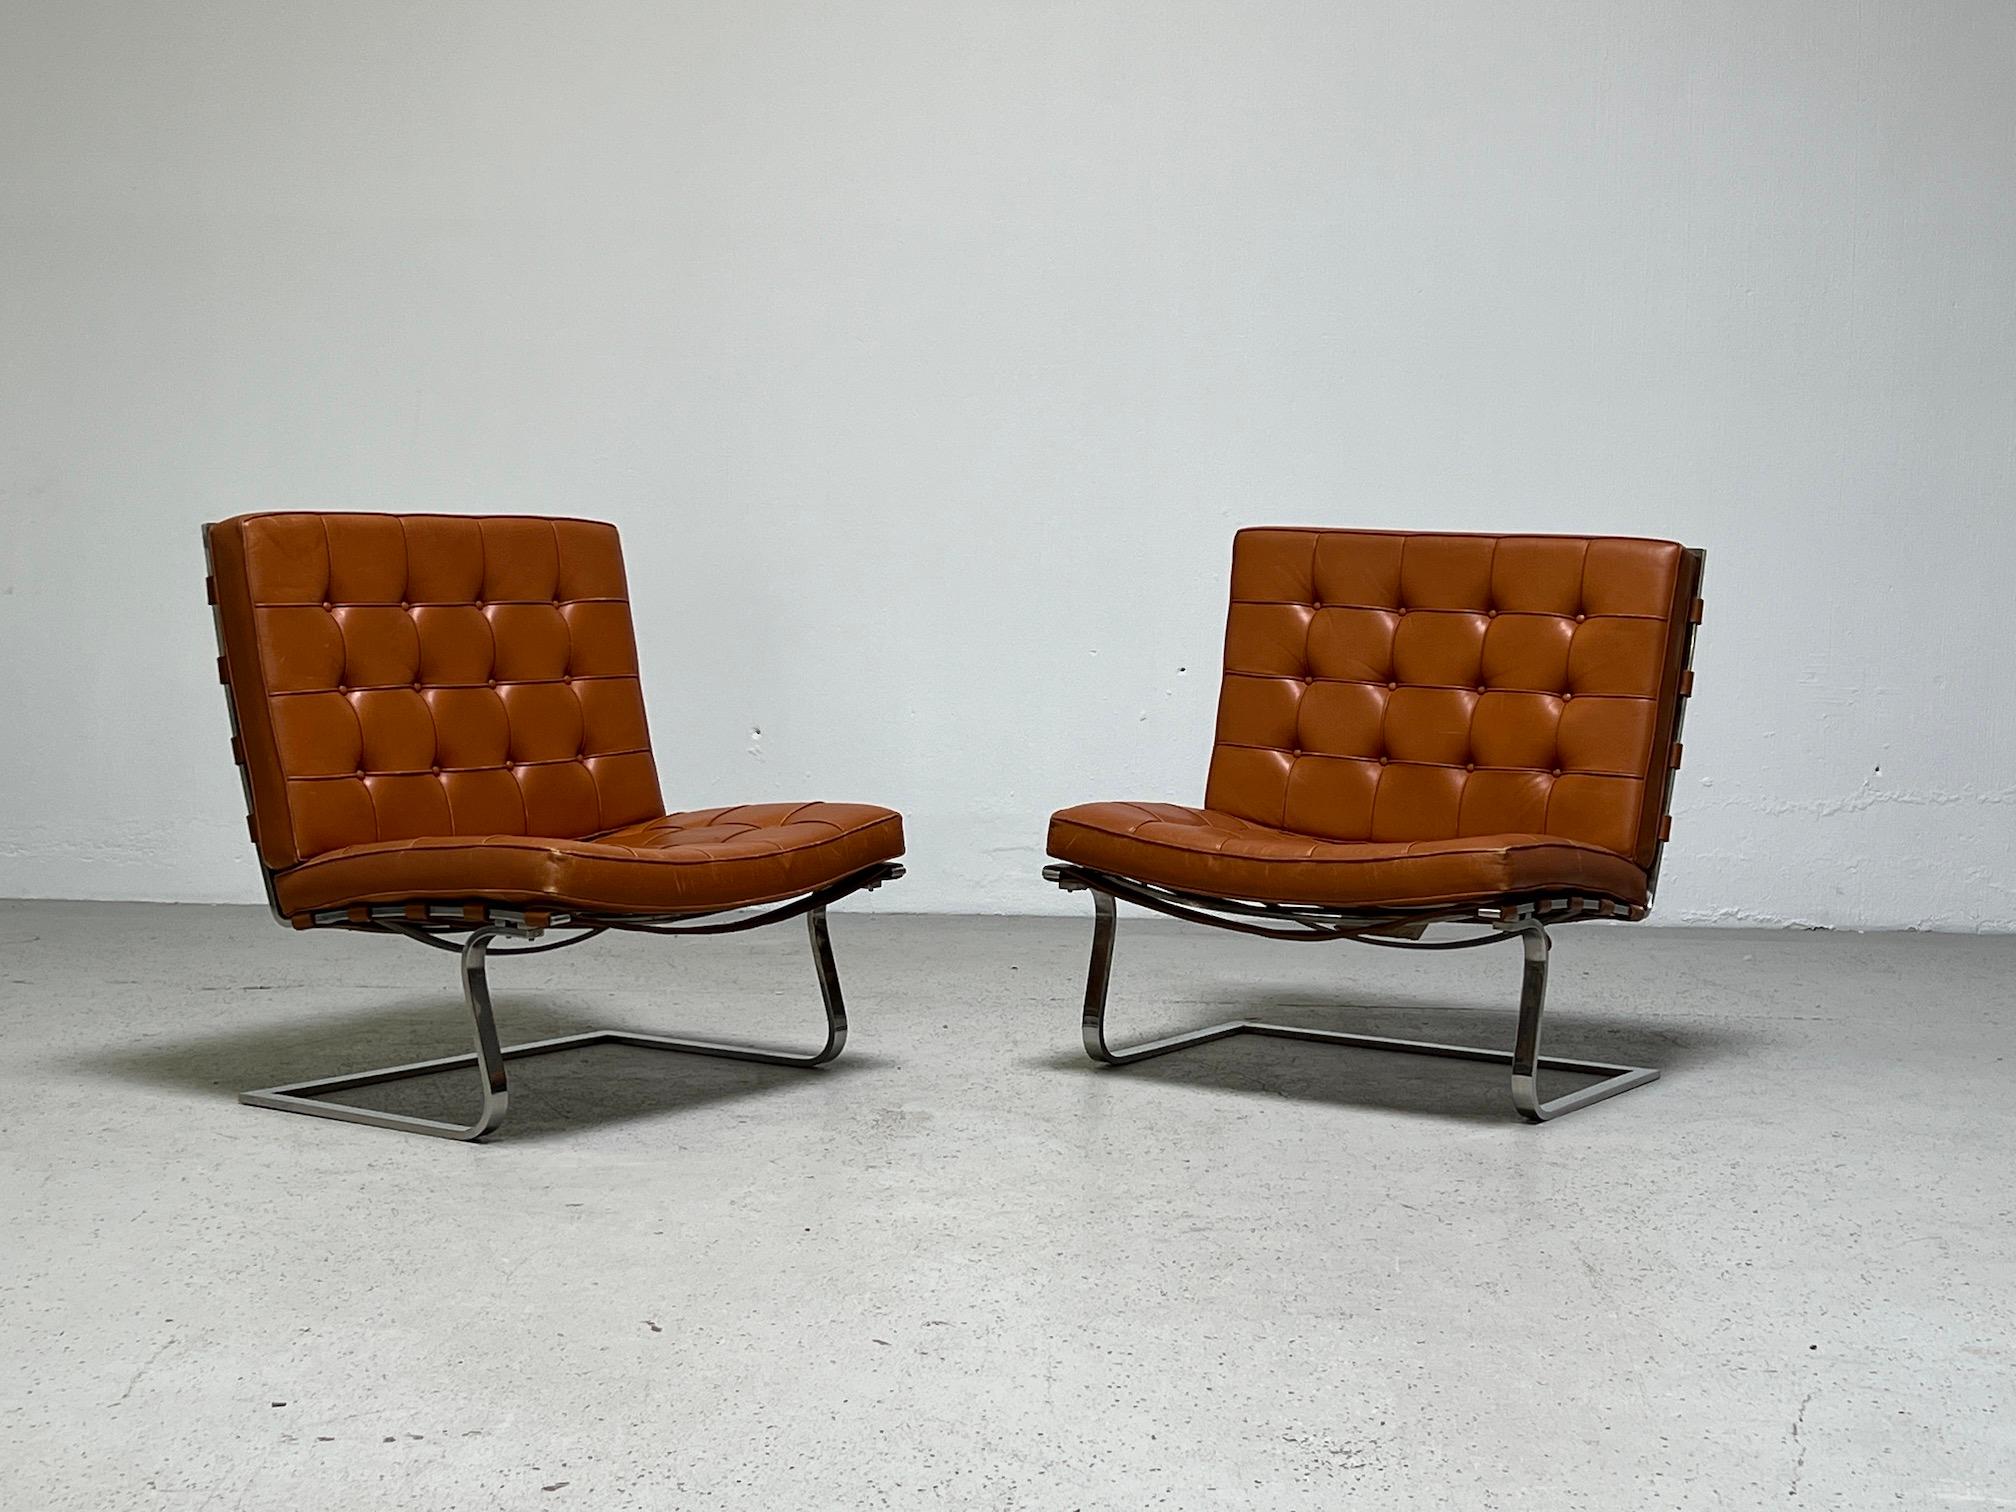 Leather Pair of Tugendhat Chairs by Mies van der Rohe for Knoll